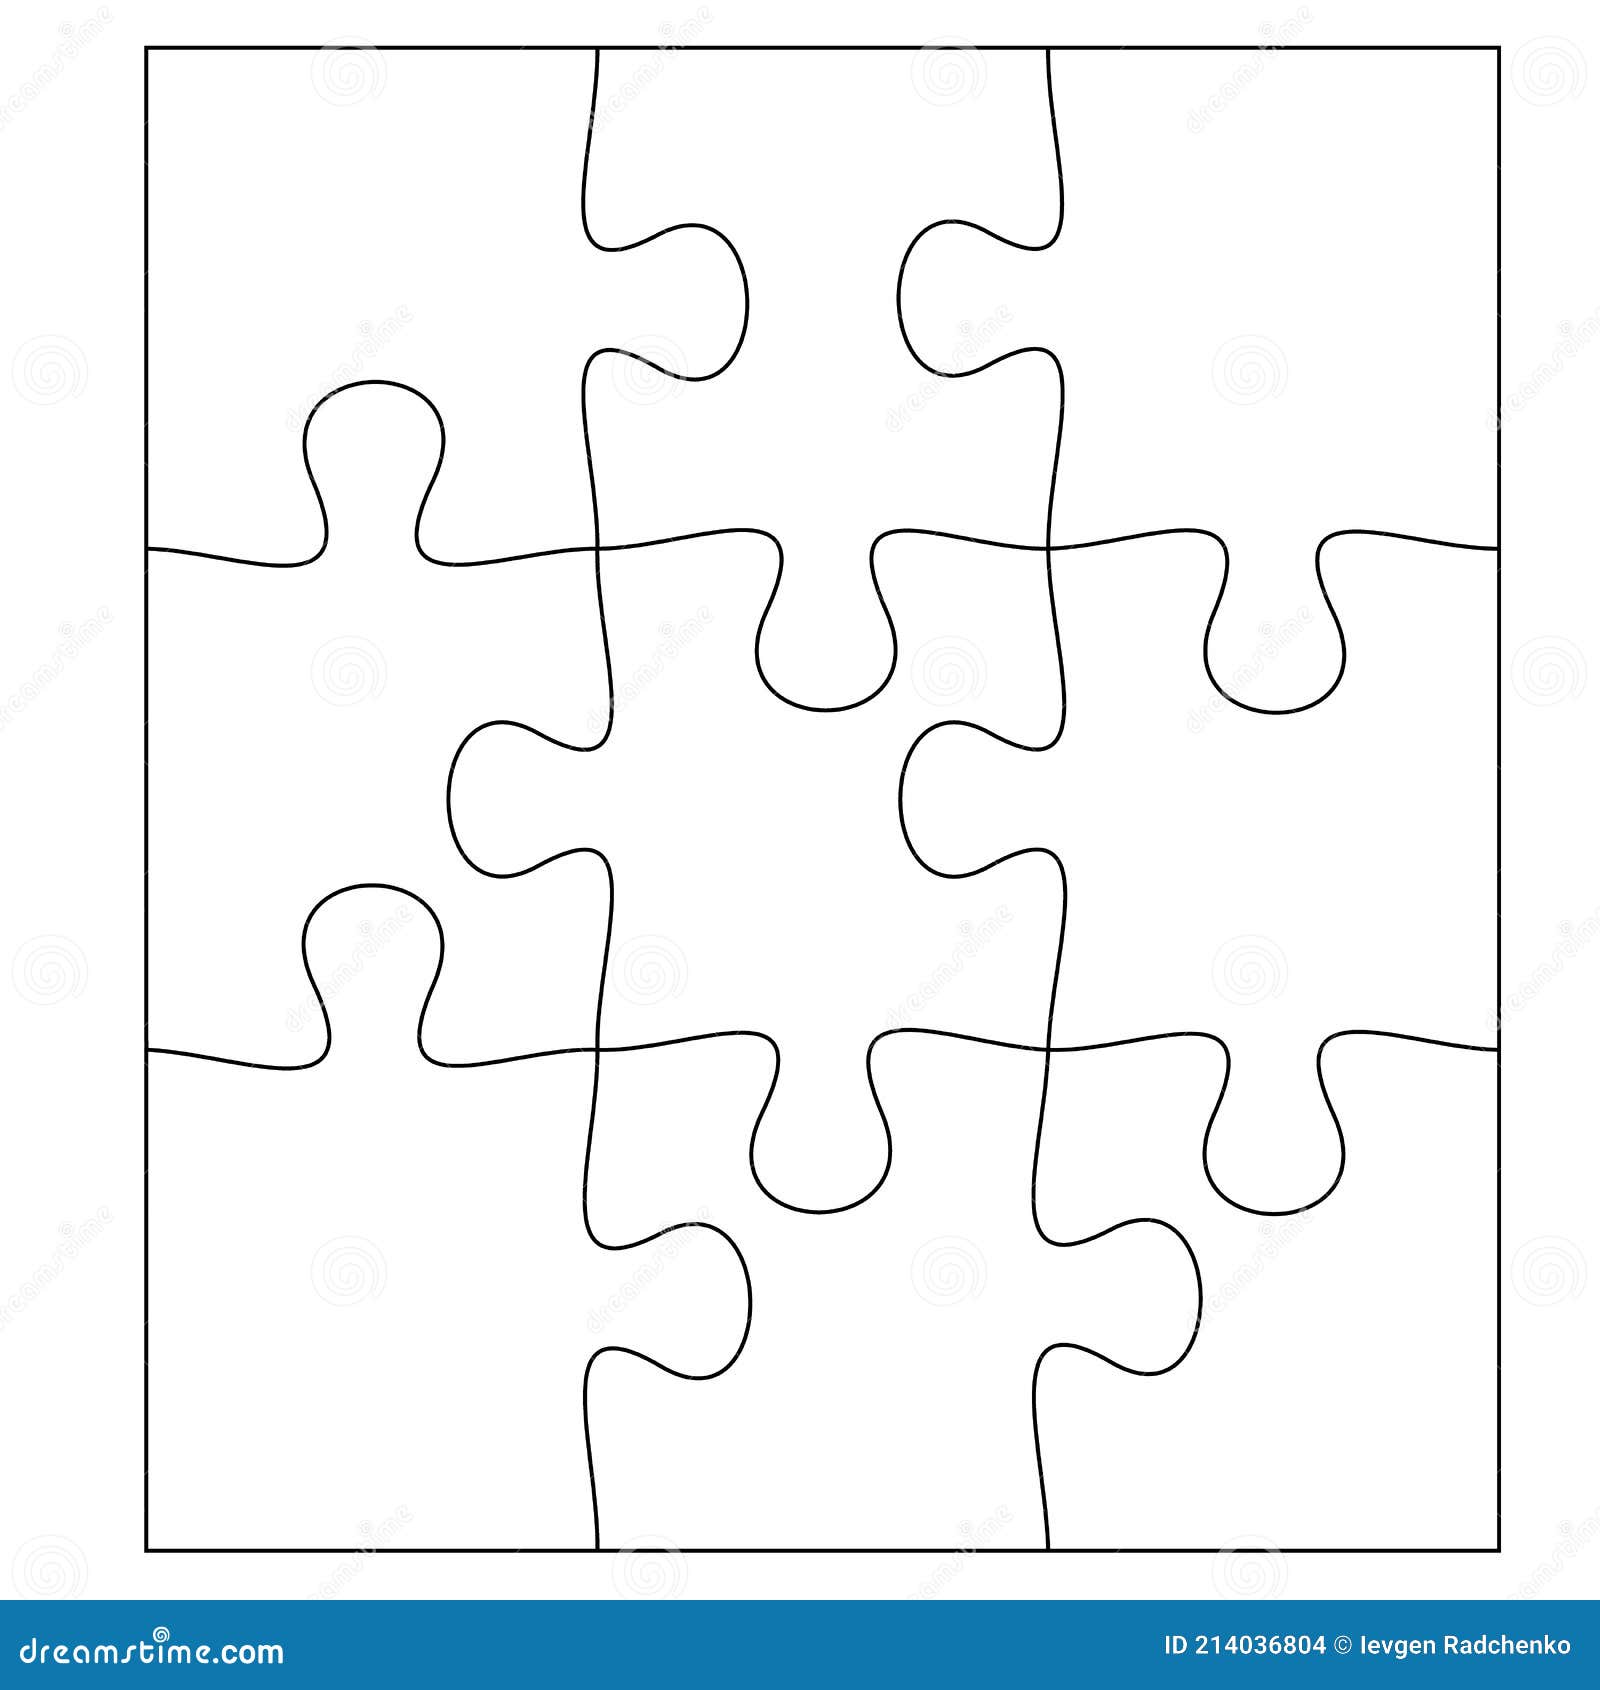 Blank Jigsaw Puzzle 9 pieces. Simple line art style for printing and web.  Stock vector illustration Stock Vector by ©JeksonJS 459092936